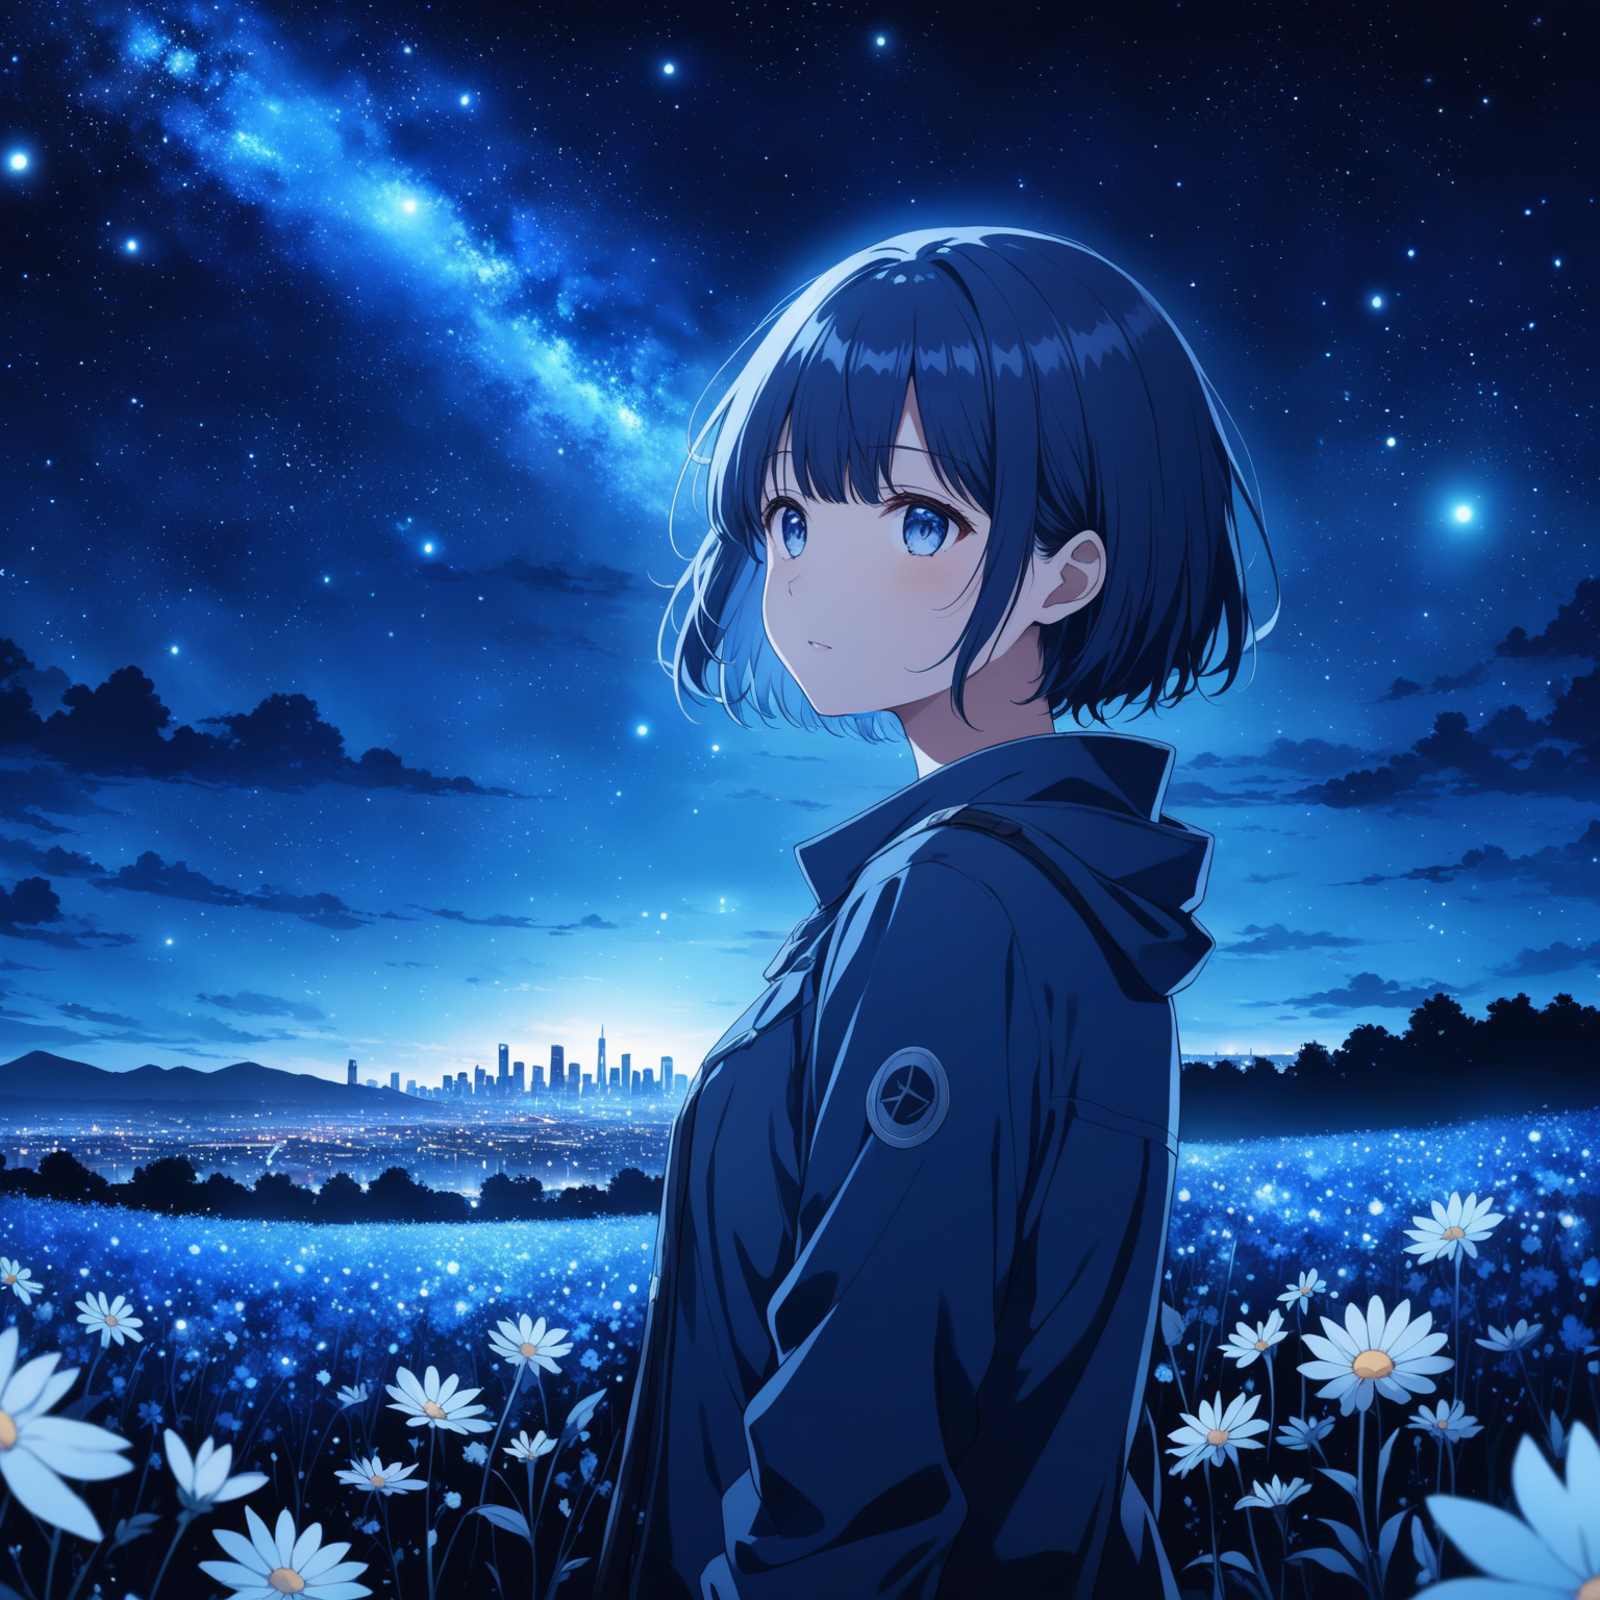 A girl in a black jacket stands in a field of flowers at night.